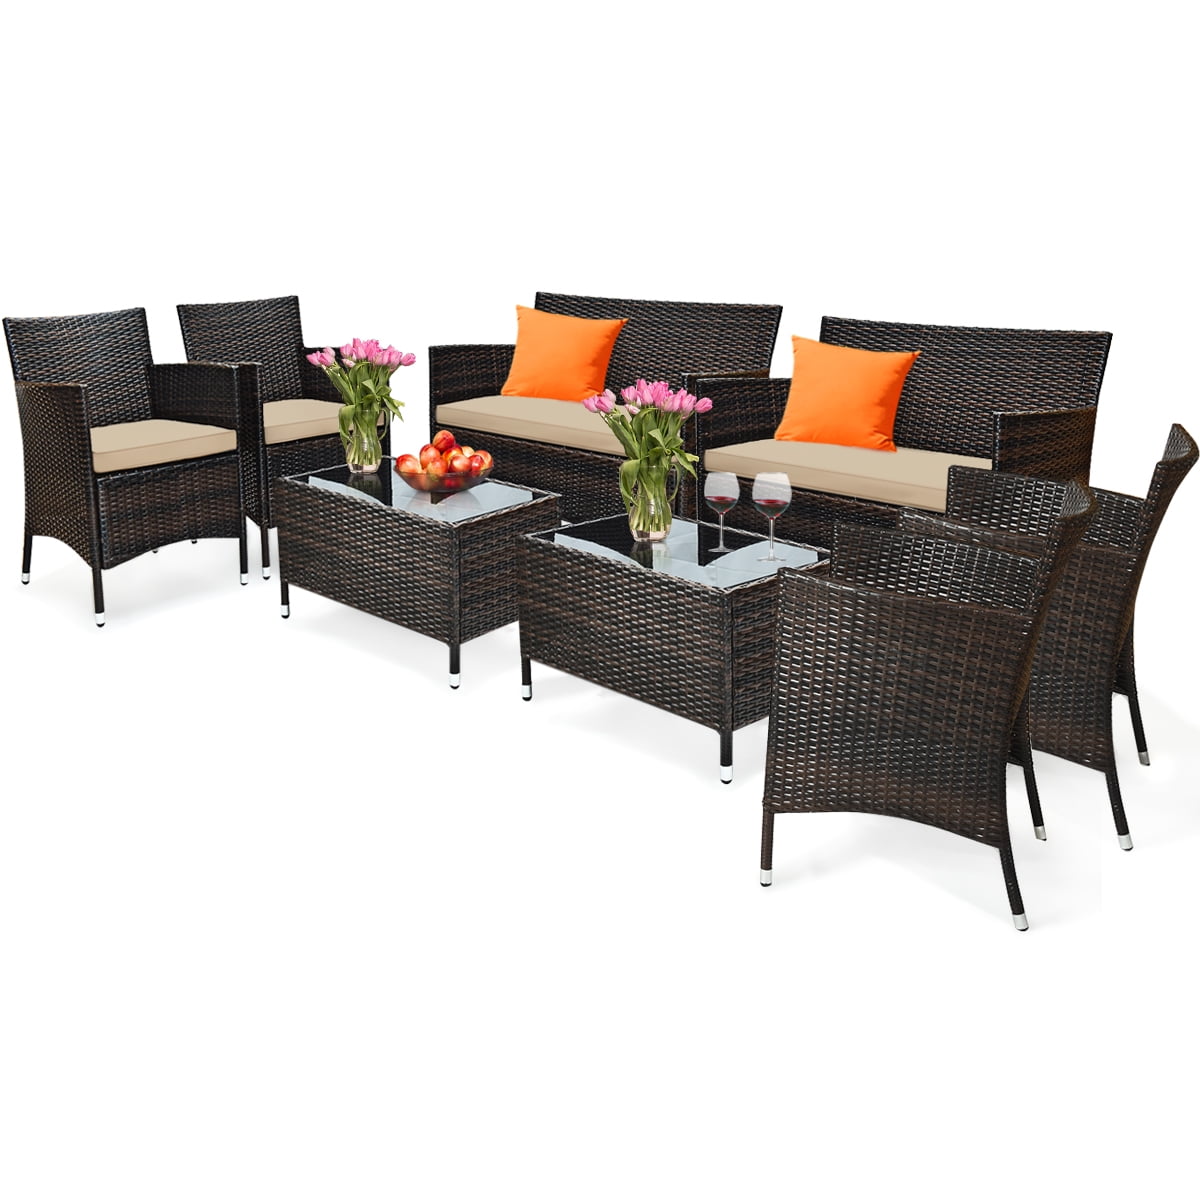 Grey CASTAIN Rattan Garden Furniture Set Outdoor Lounge Poolside Family Lawn Furniture 4 Piece Set Table Chair Sofa Patio